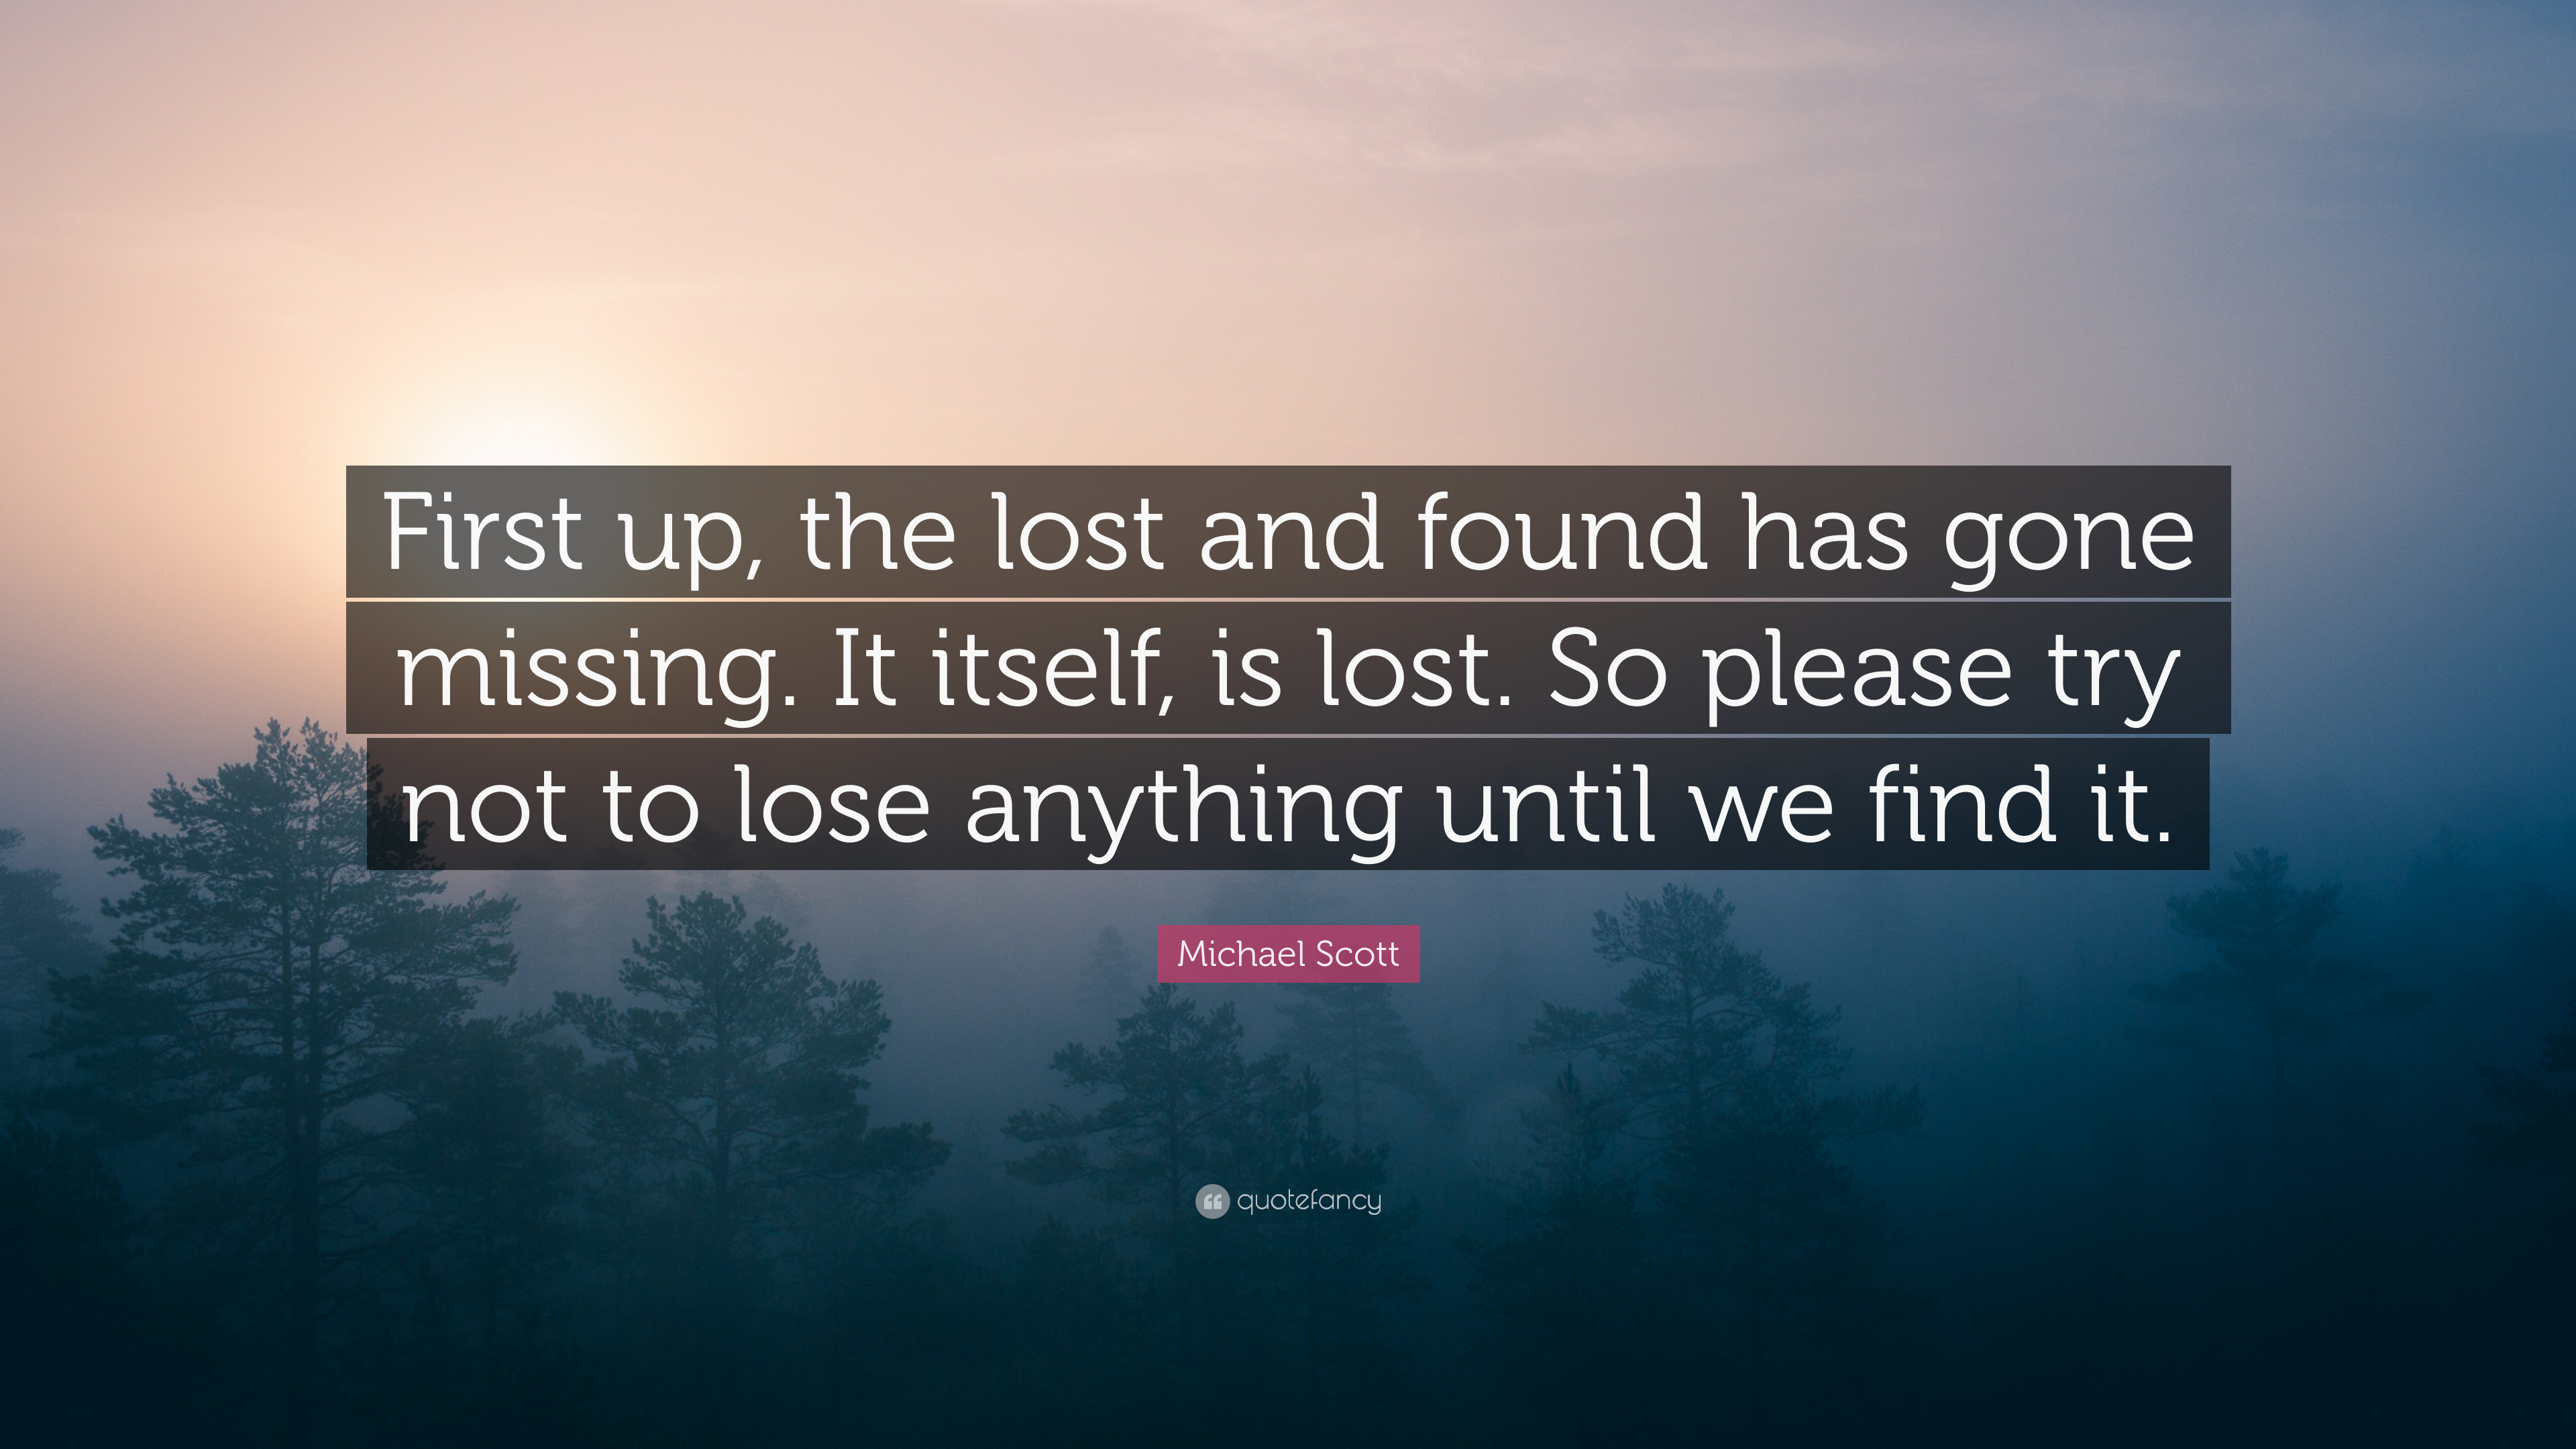 Michael Scott Quote: “First up, the lost and found has gone